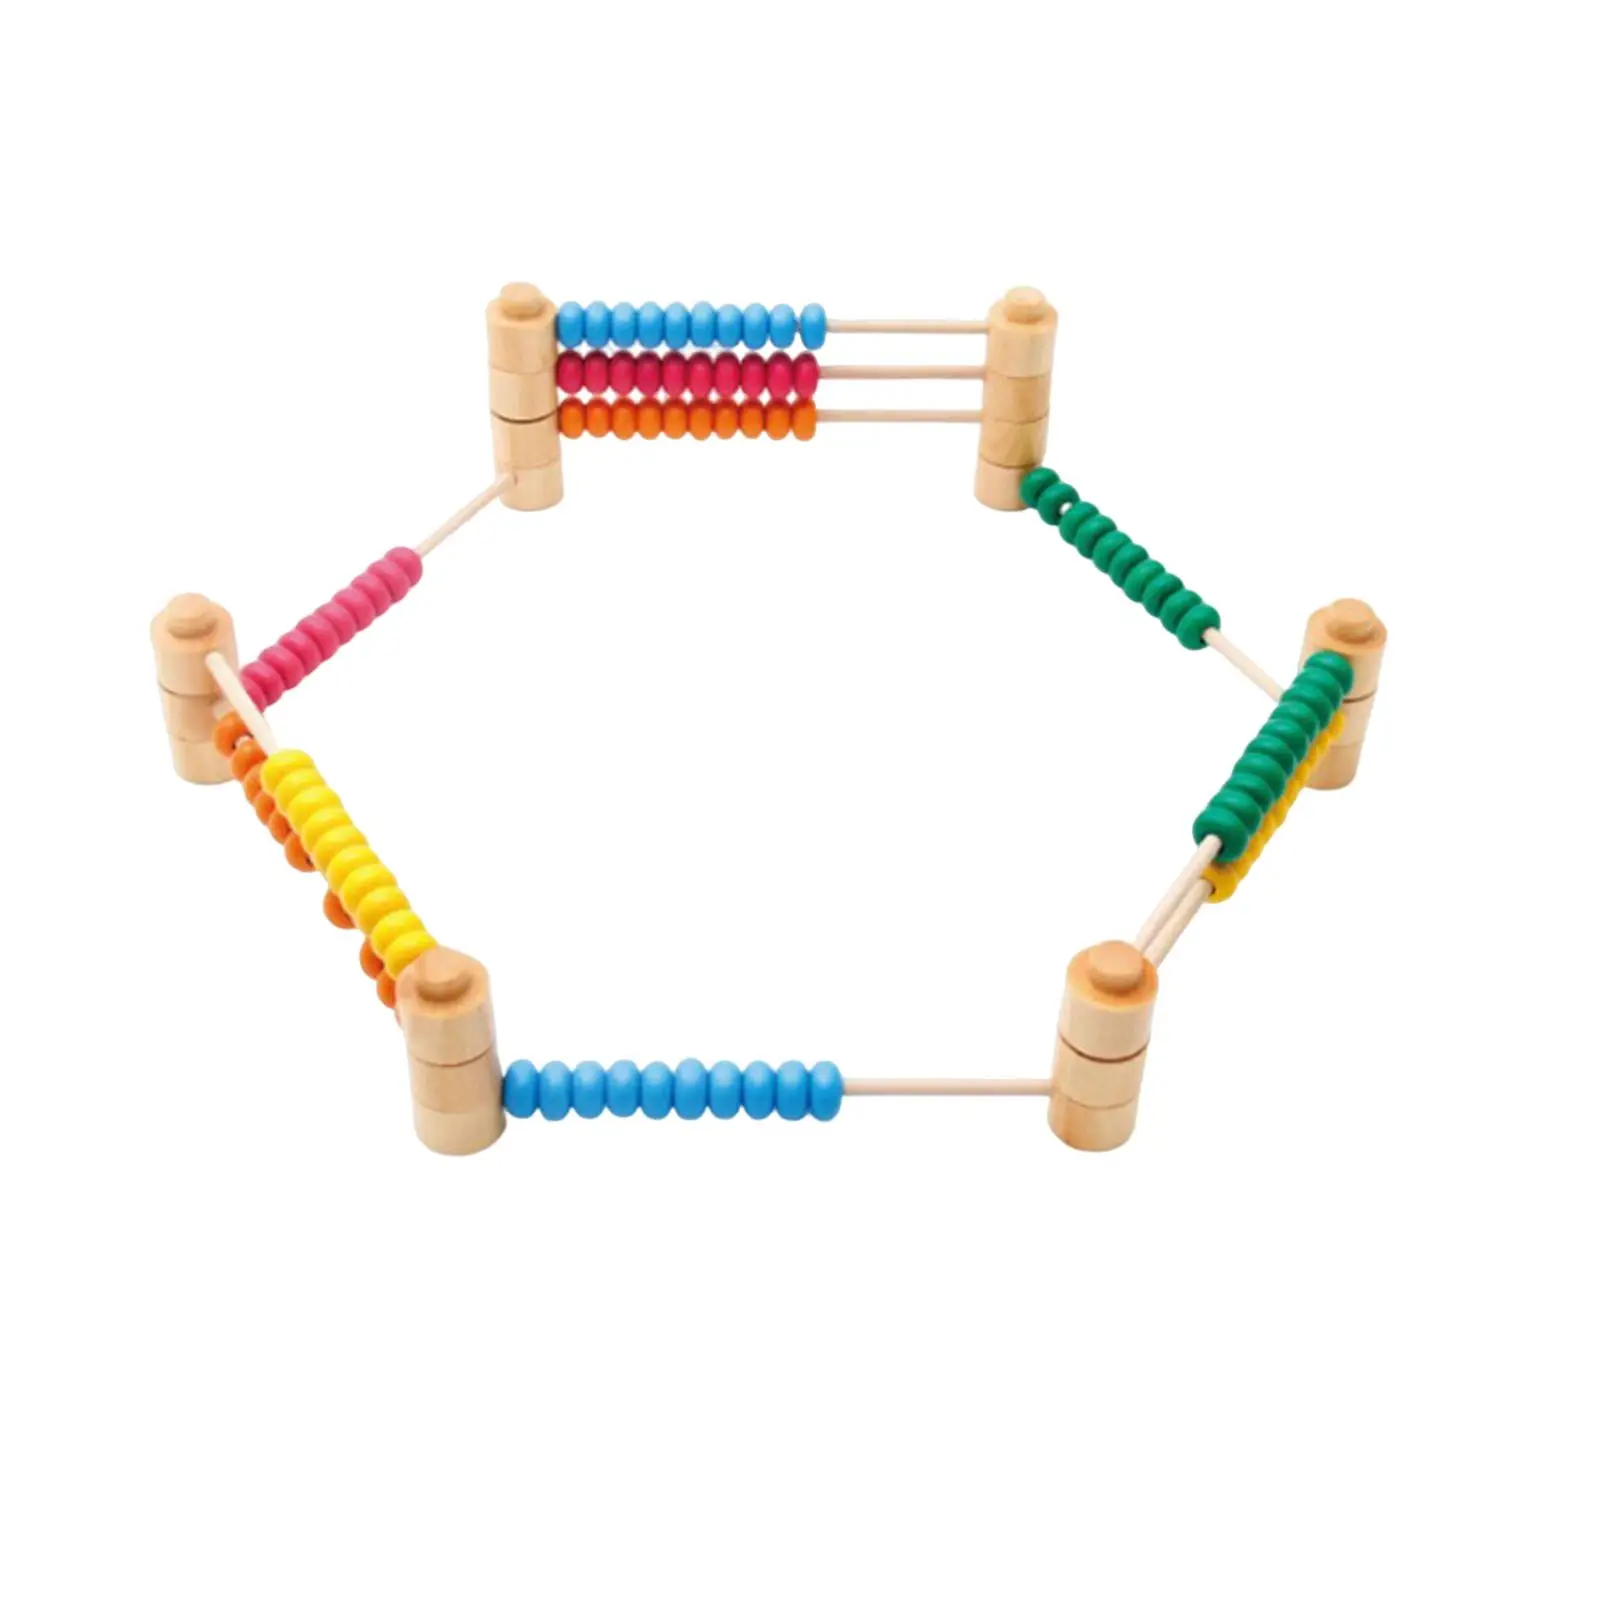 Educational Wooden Abacus Frame Stacking Manipulative Materials Math Learning